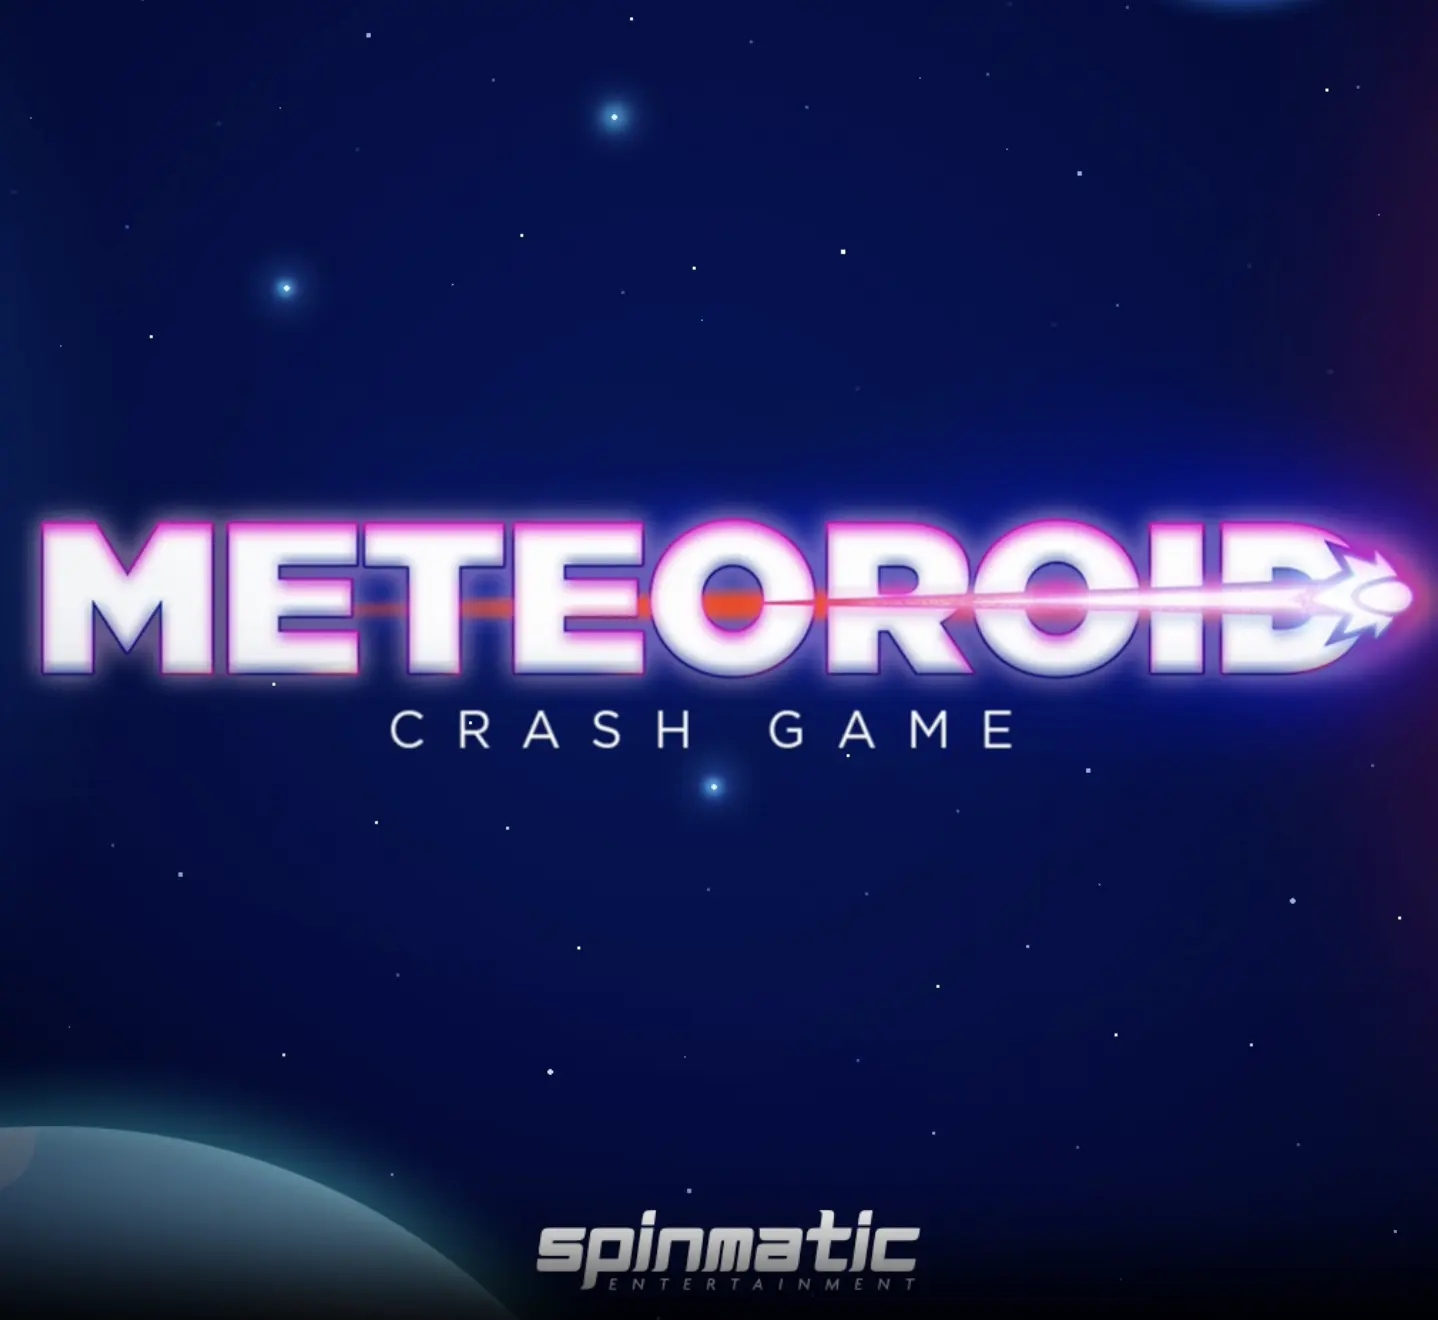 Meteroid by Spinmatic Entertainment